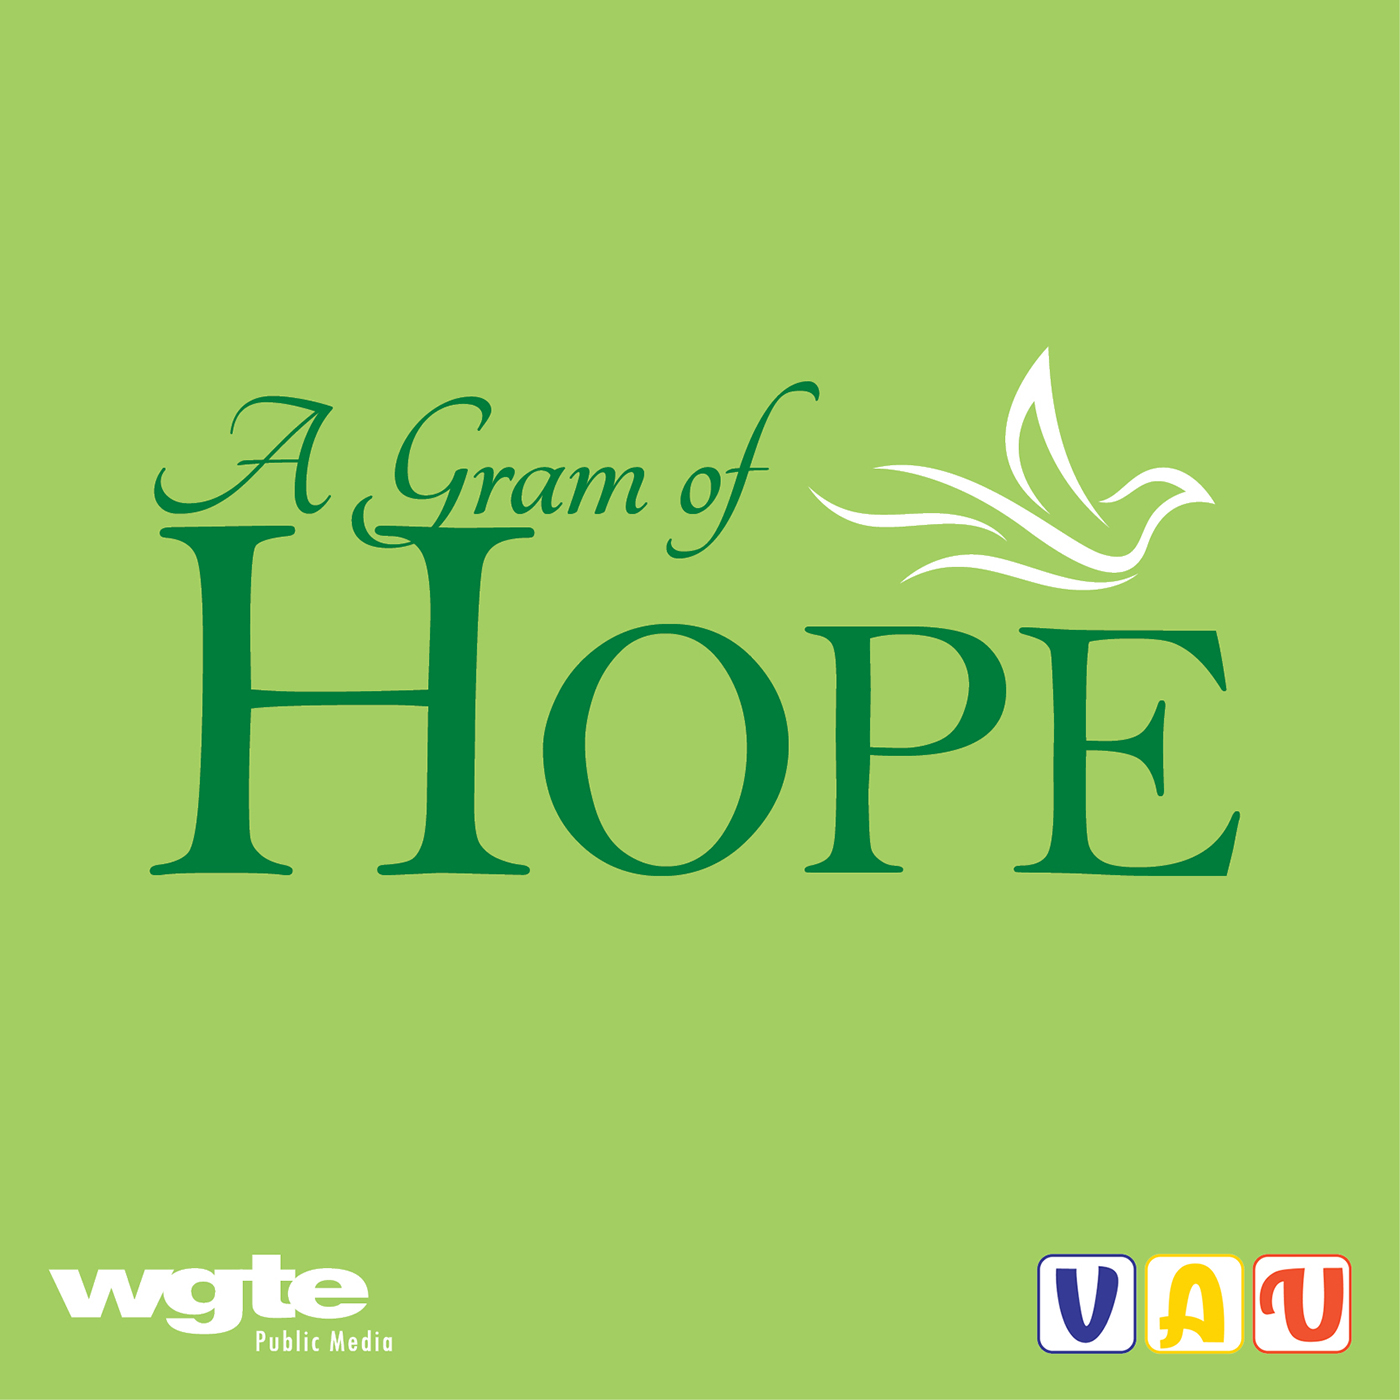 Voices Around Us Podcast a gram of hope